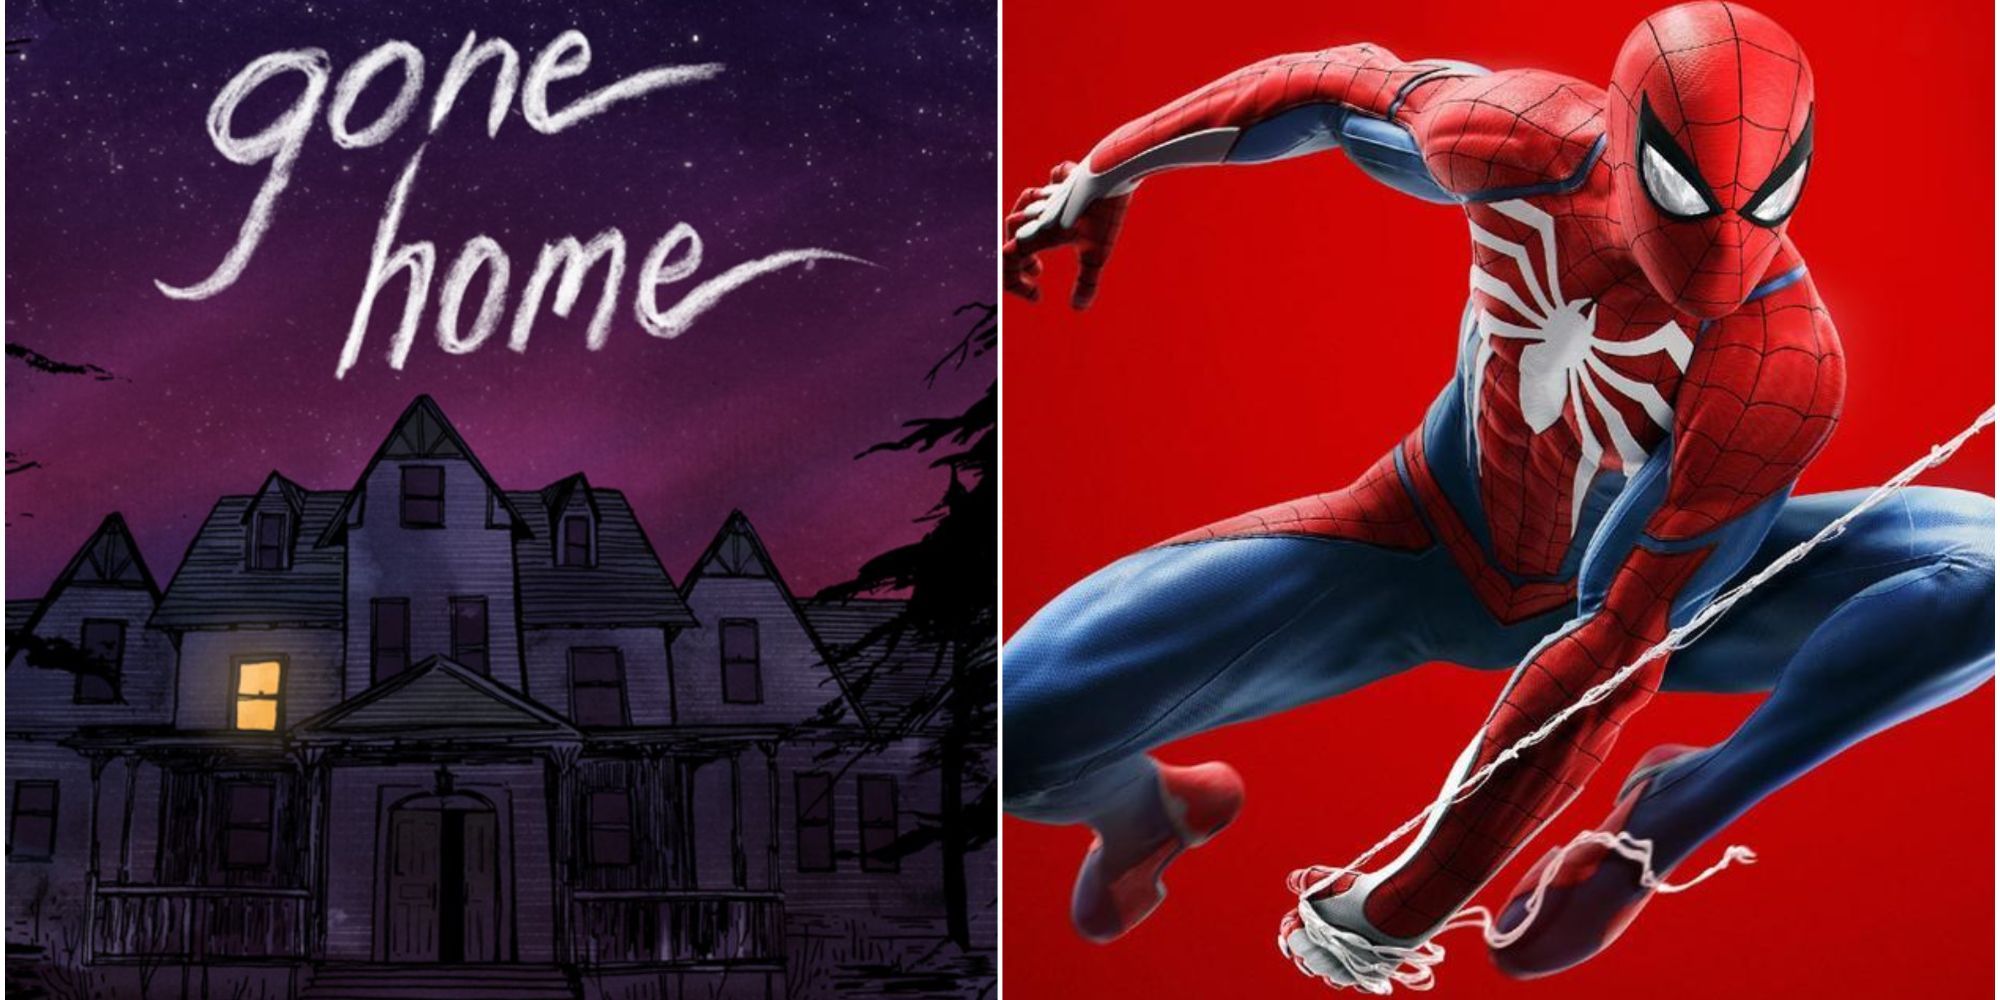 The title poster for 'Gone Home', which is a 2D gothic house under a purple sky, next to Spider-Man slinging a web